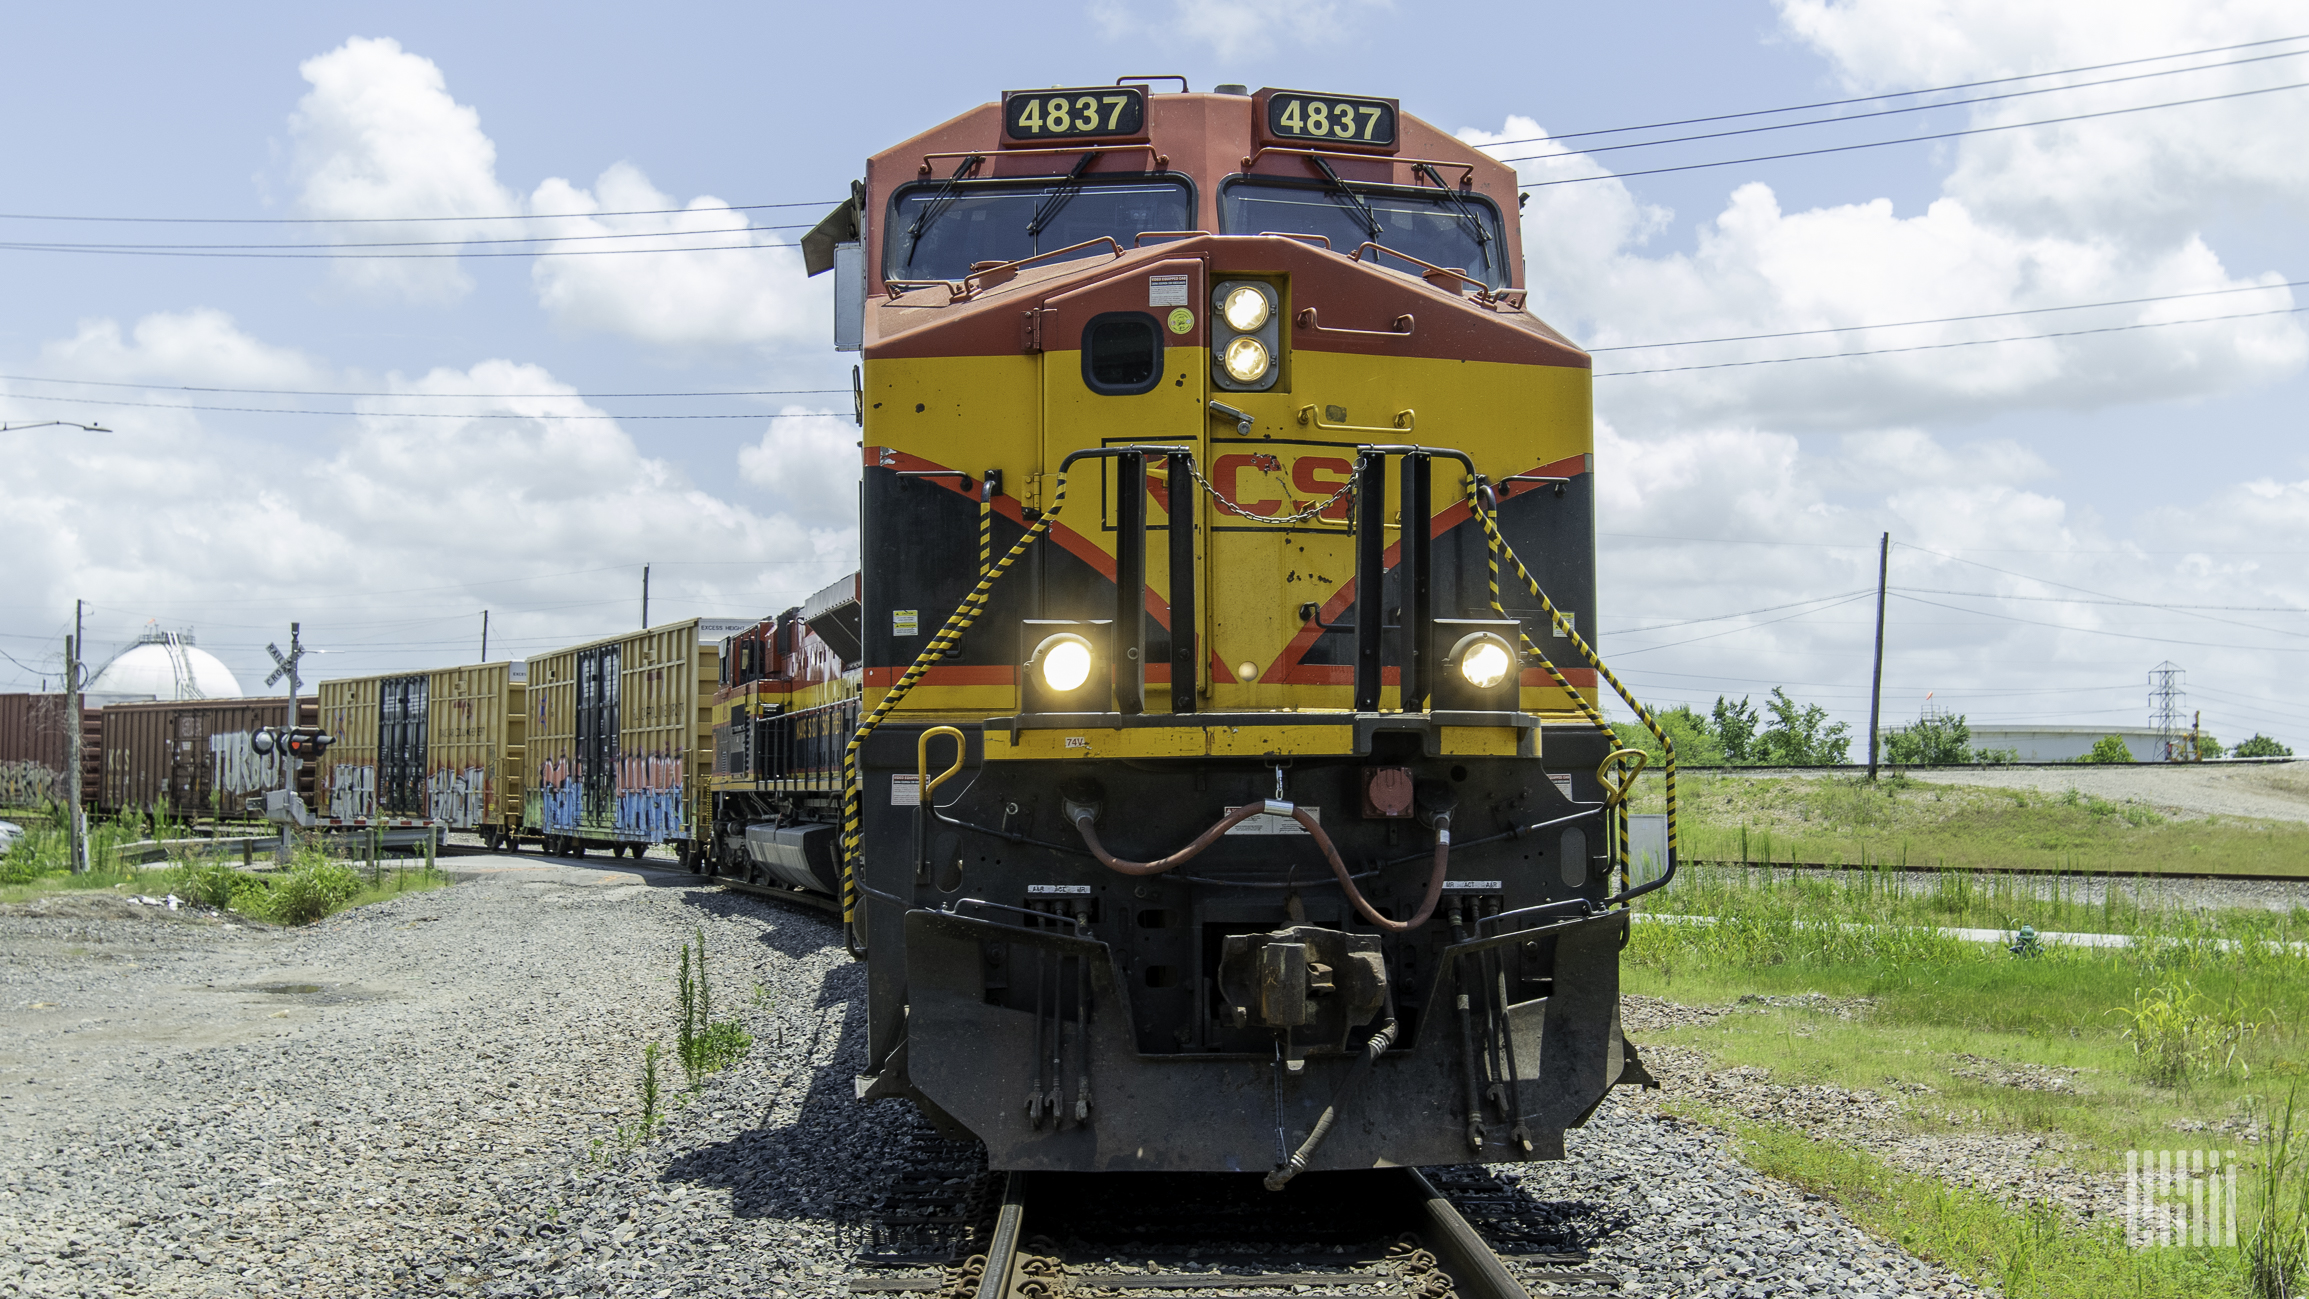 A photograph of a Kansas City Southern train hauling intermodal containers.